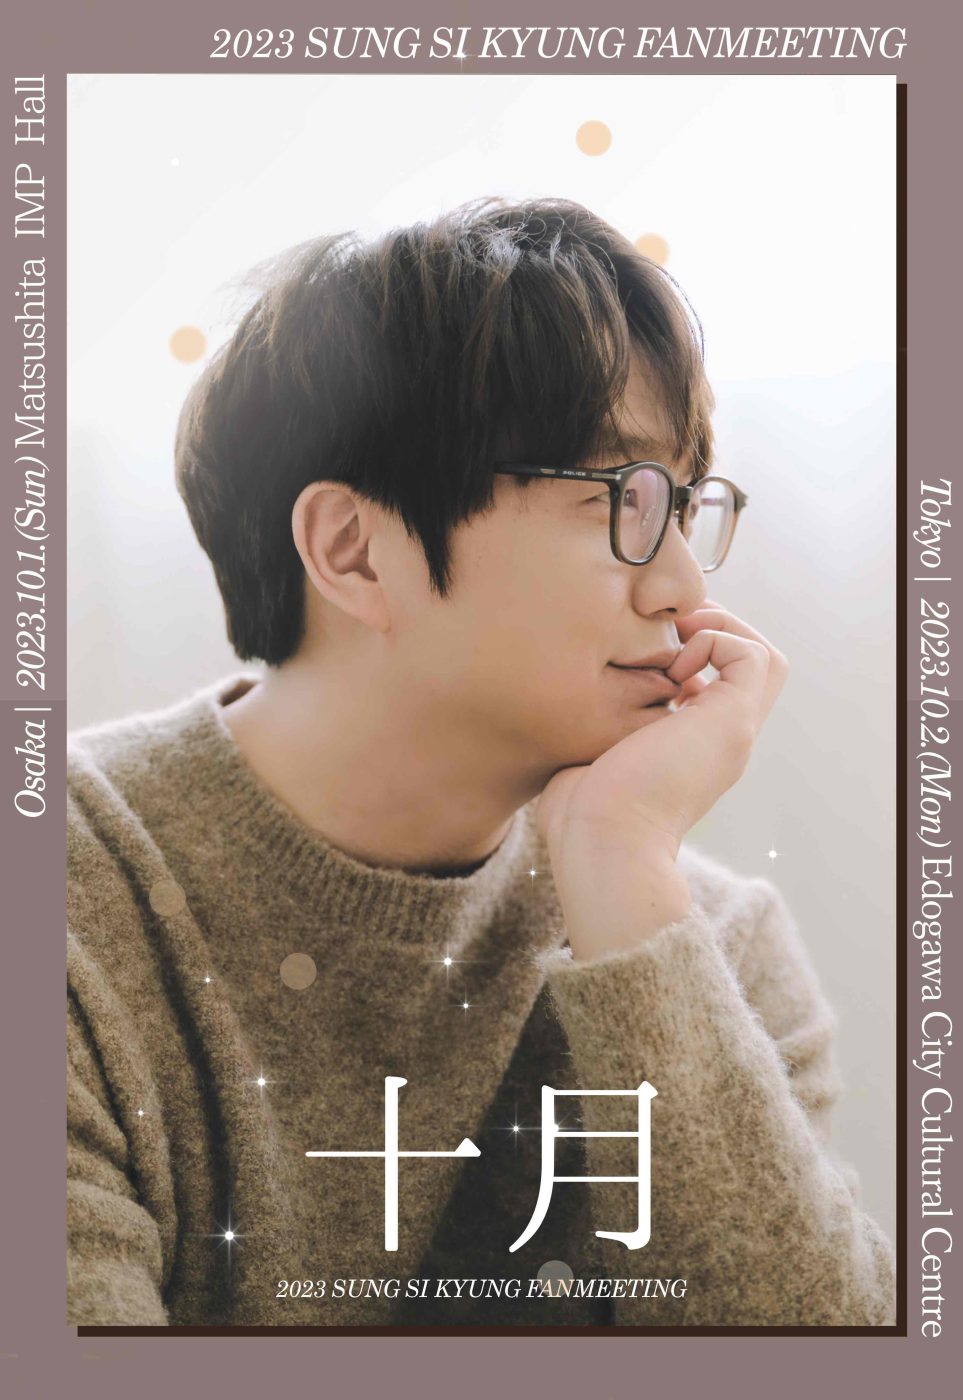 2023 Sung Si Kyung Fanmeeting “十月”